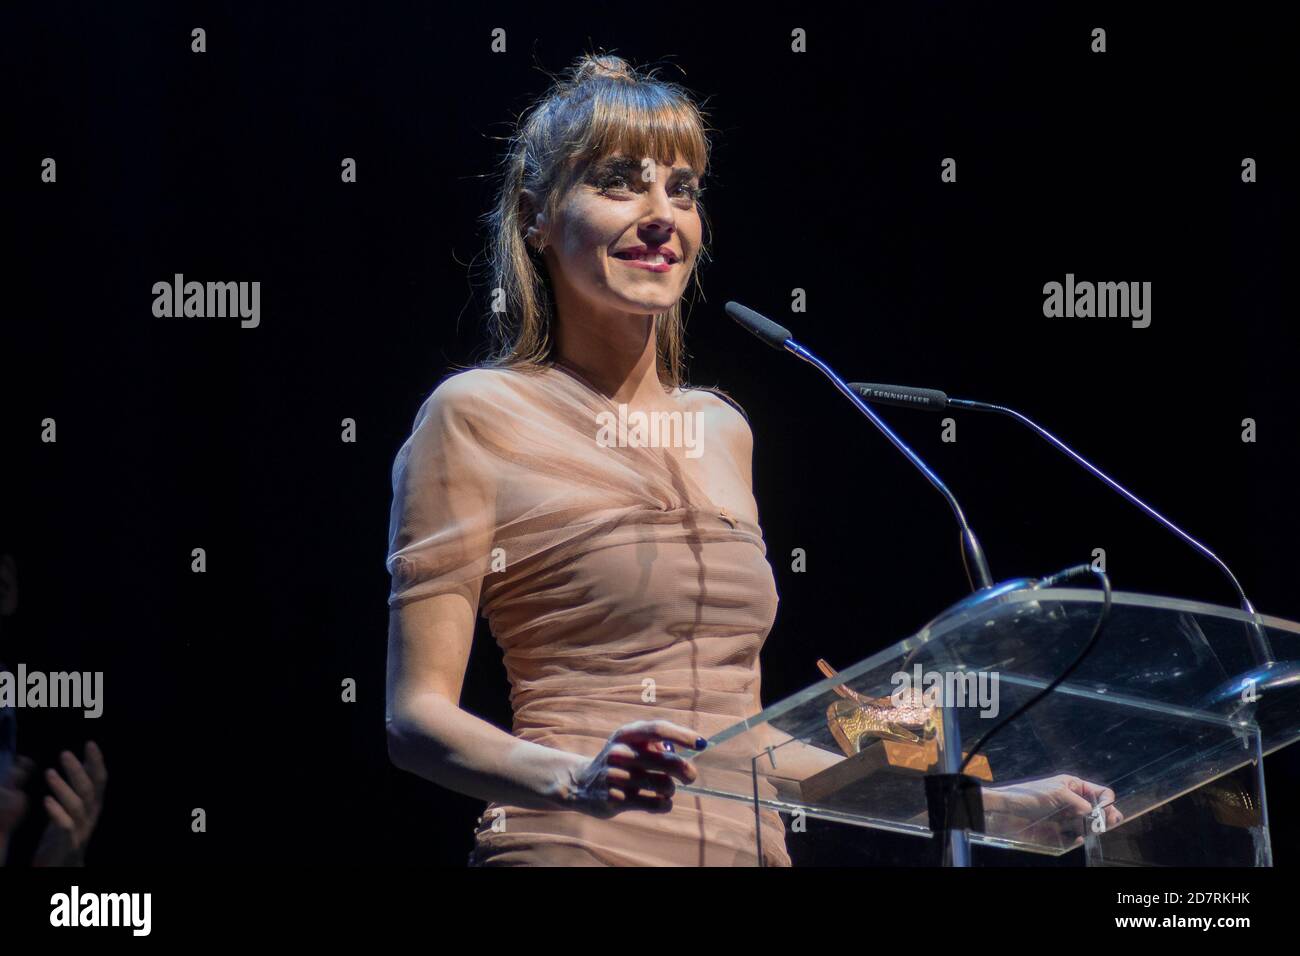 Irene Arcos receives her award from 'Union de Actores' Awards 2020 at Teatro Circo Price in Madrid, Spain.March 09, 2020. (Oscar Gil / Alfa Images) Stock Photo